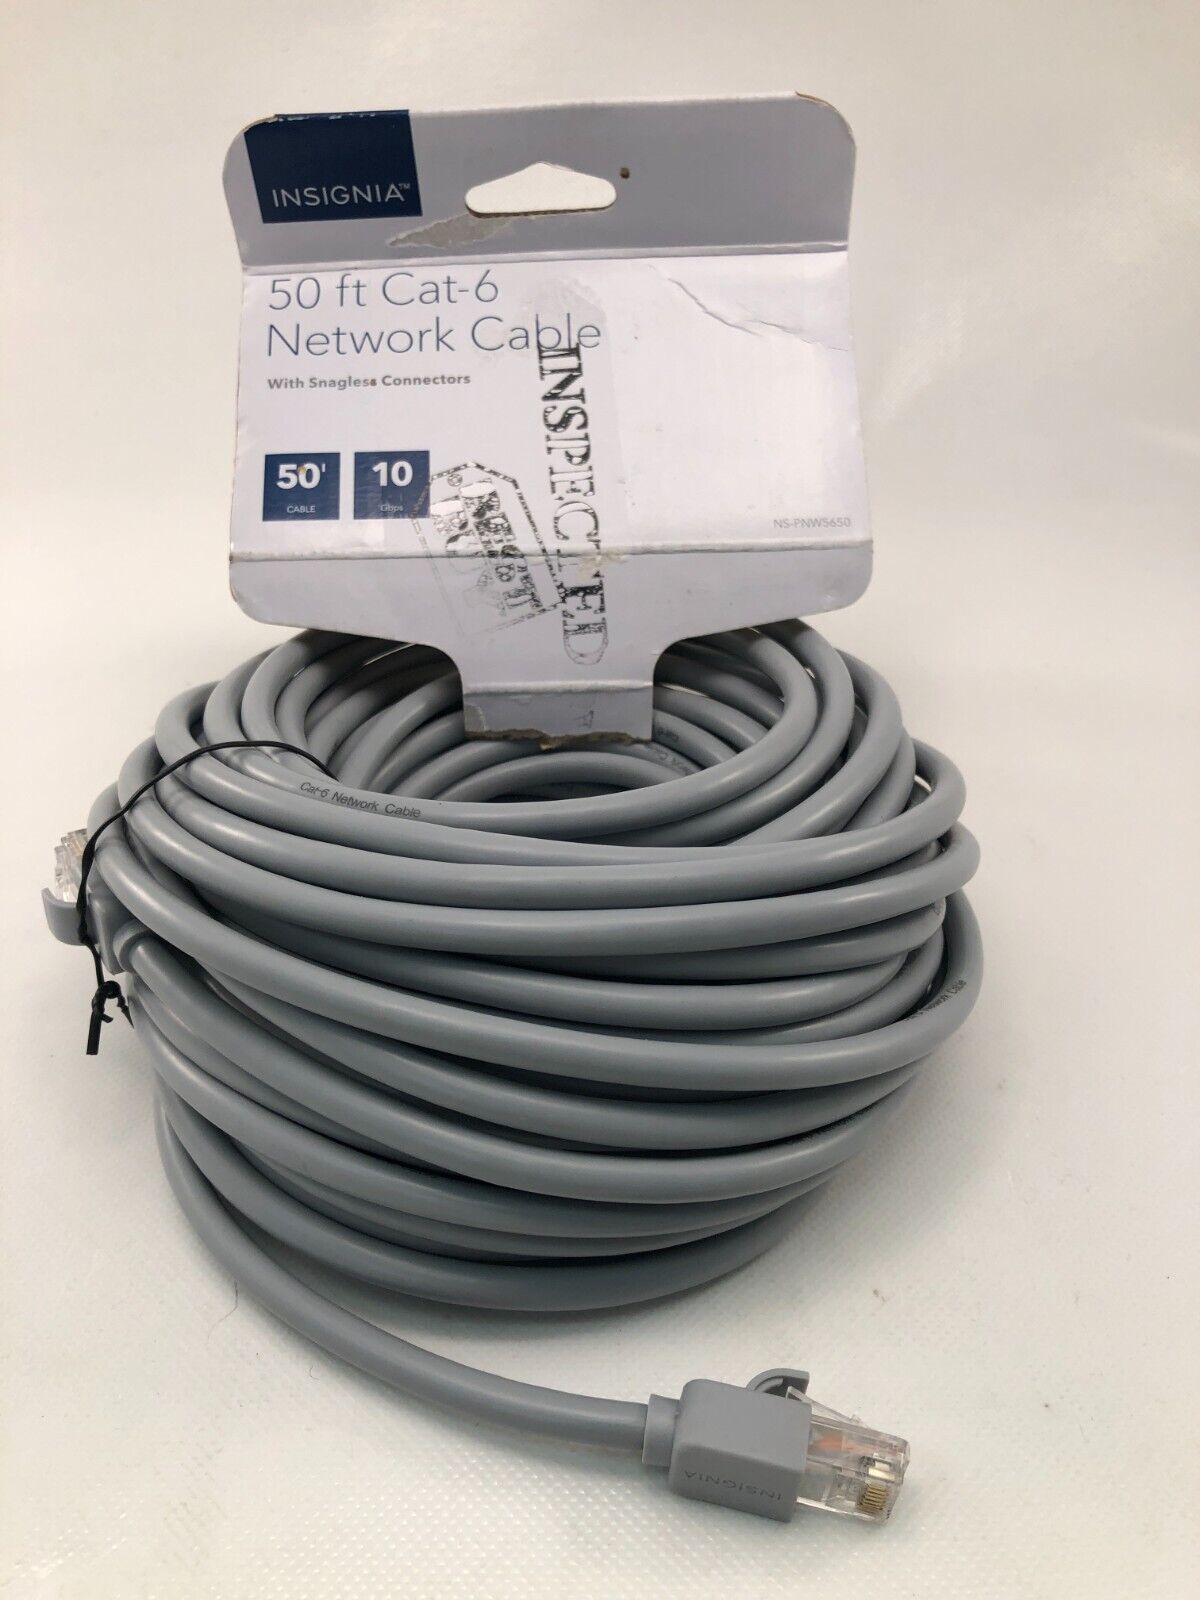 Insignia 50' Cat-6 Network Cable 21J11V  10Gbps #NS-PNW5650 NEW